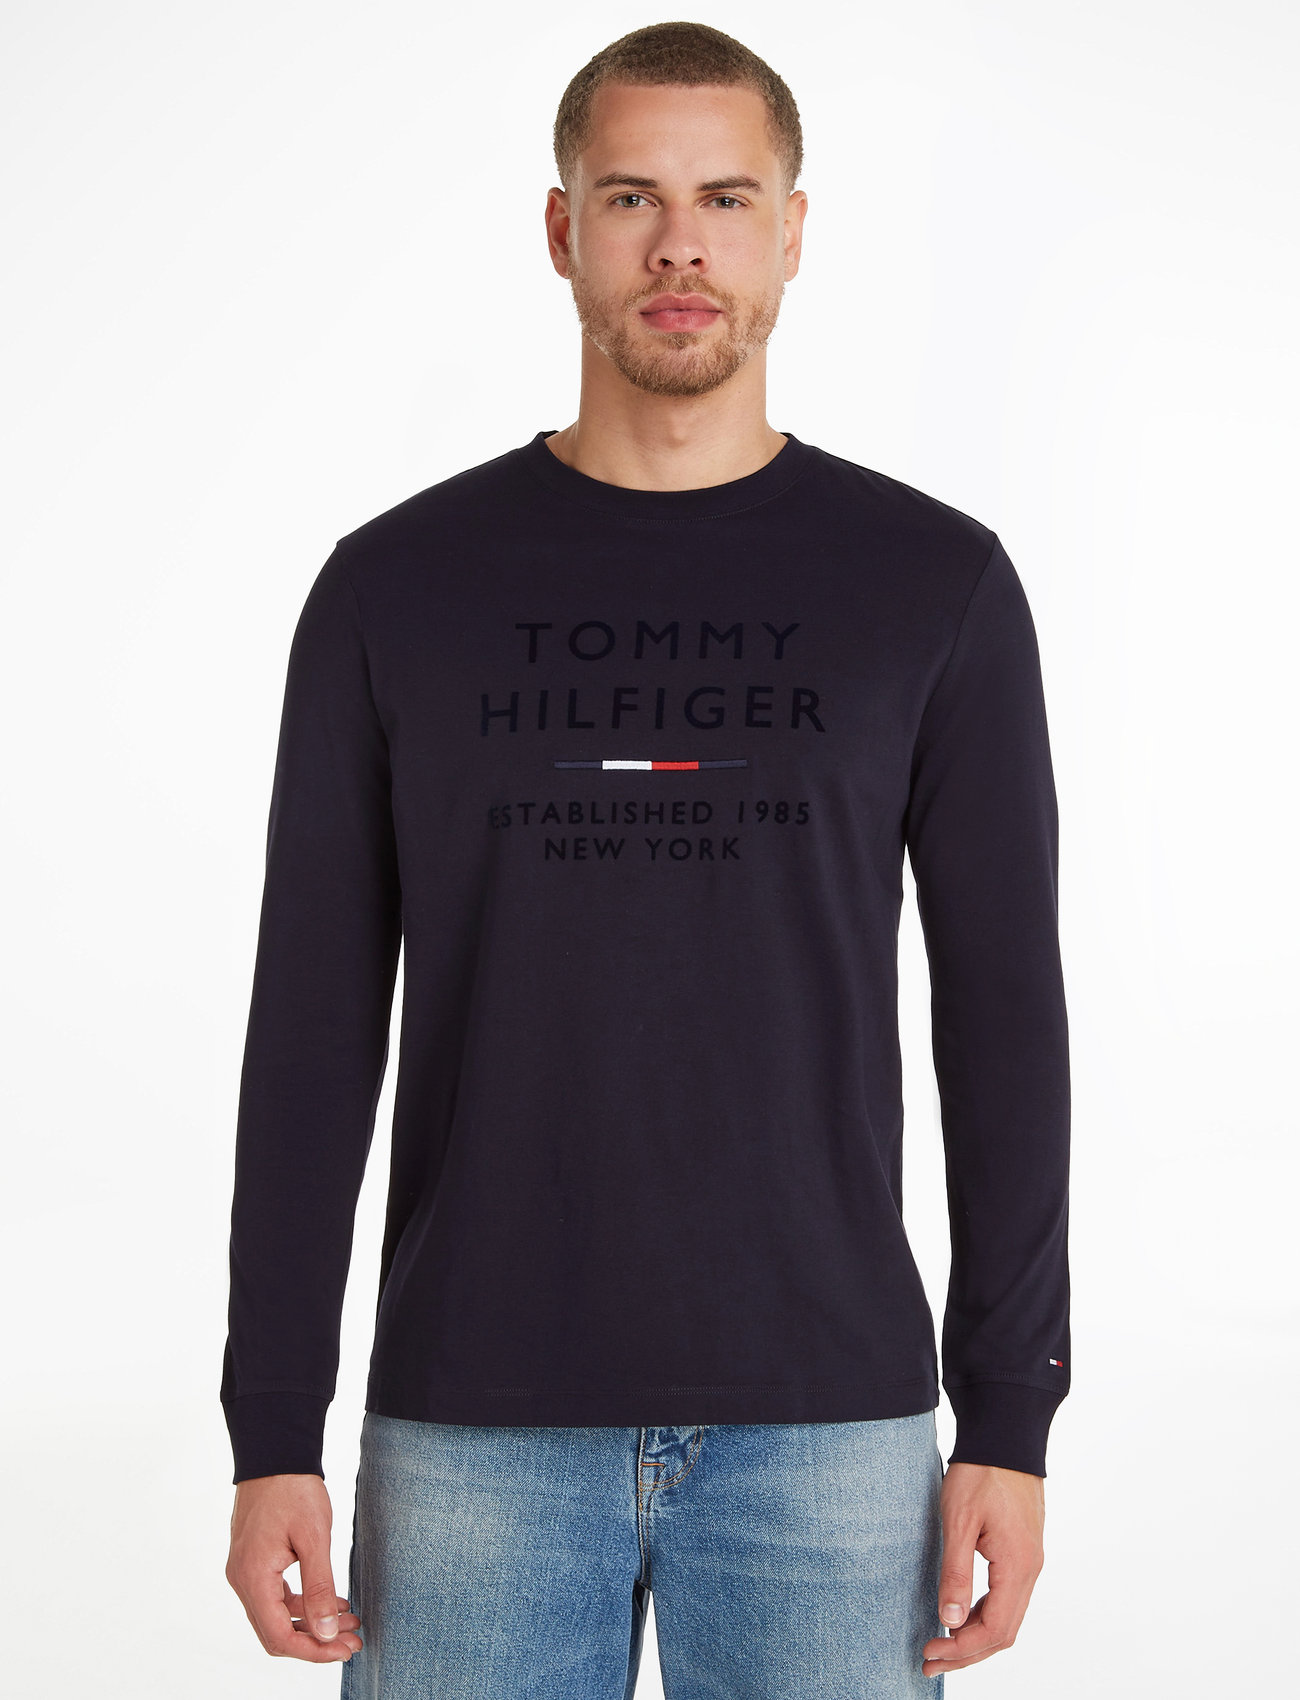 Tommy Hilfiger Stacked New Flock Ls Tee - Long-sleeved t-shirts - Boozt.com